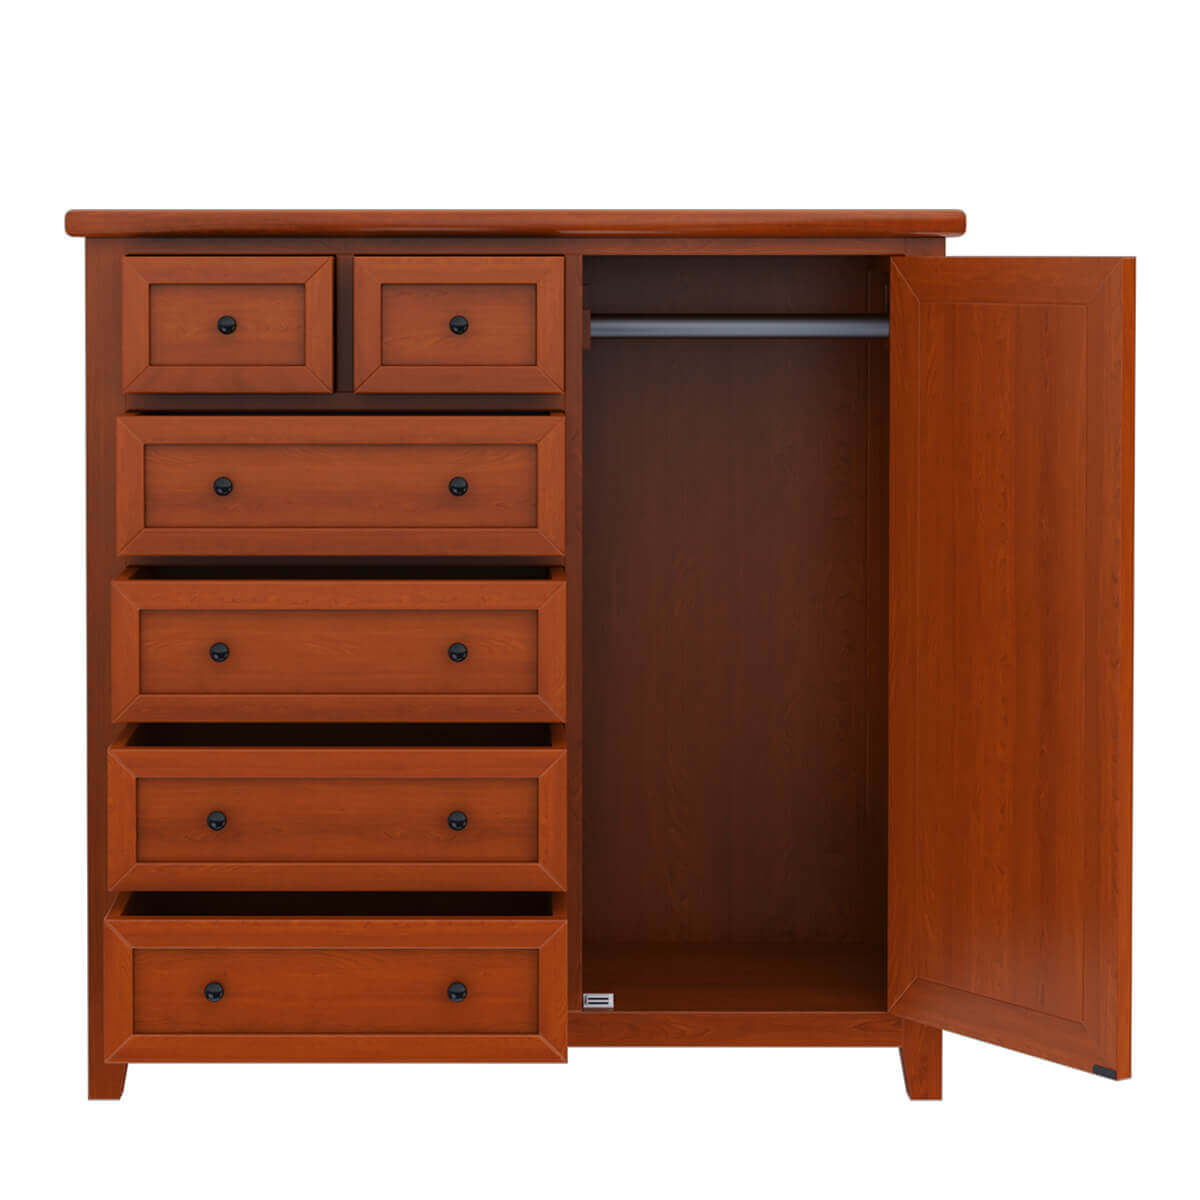 Wooden Rustic Style 6 Drawers Dresser In Mahogany Finish, Brown